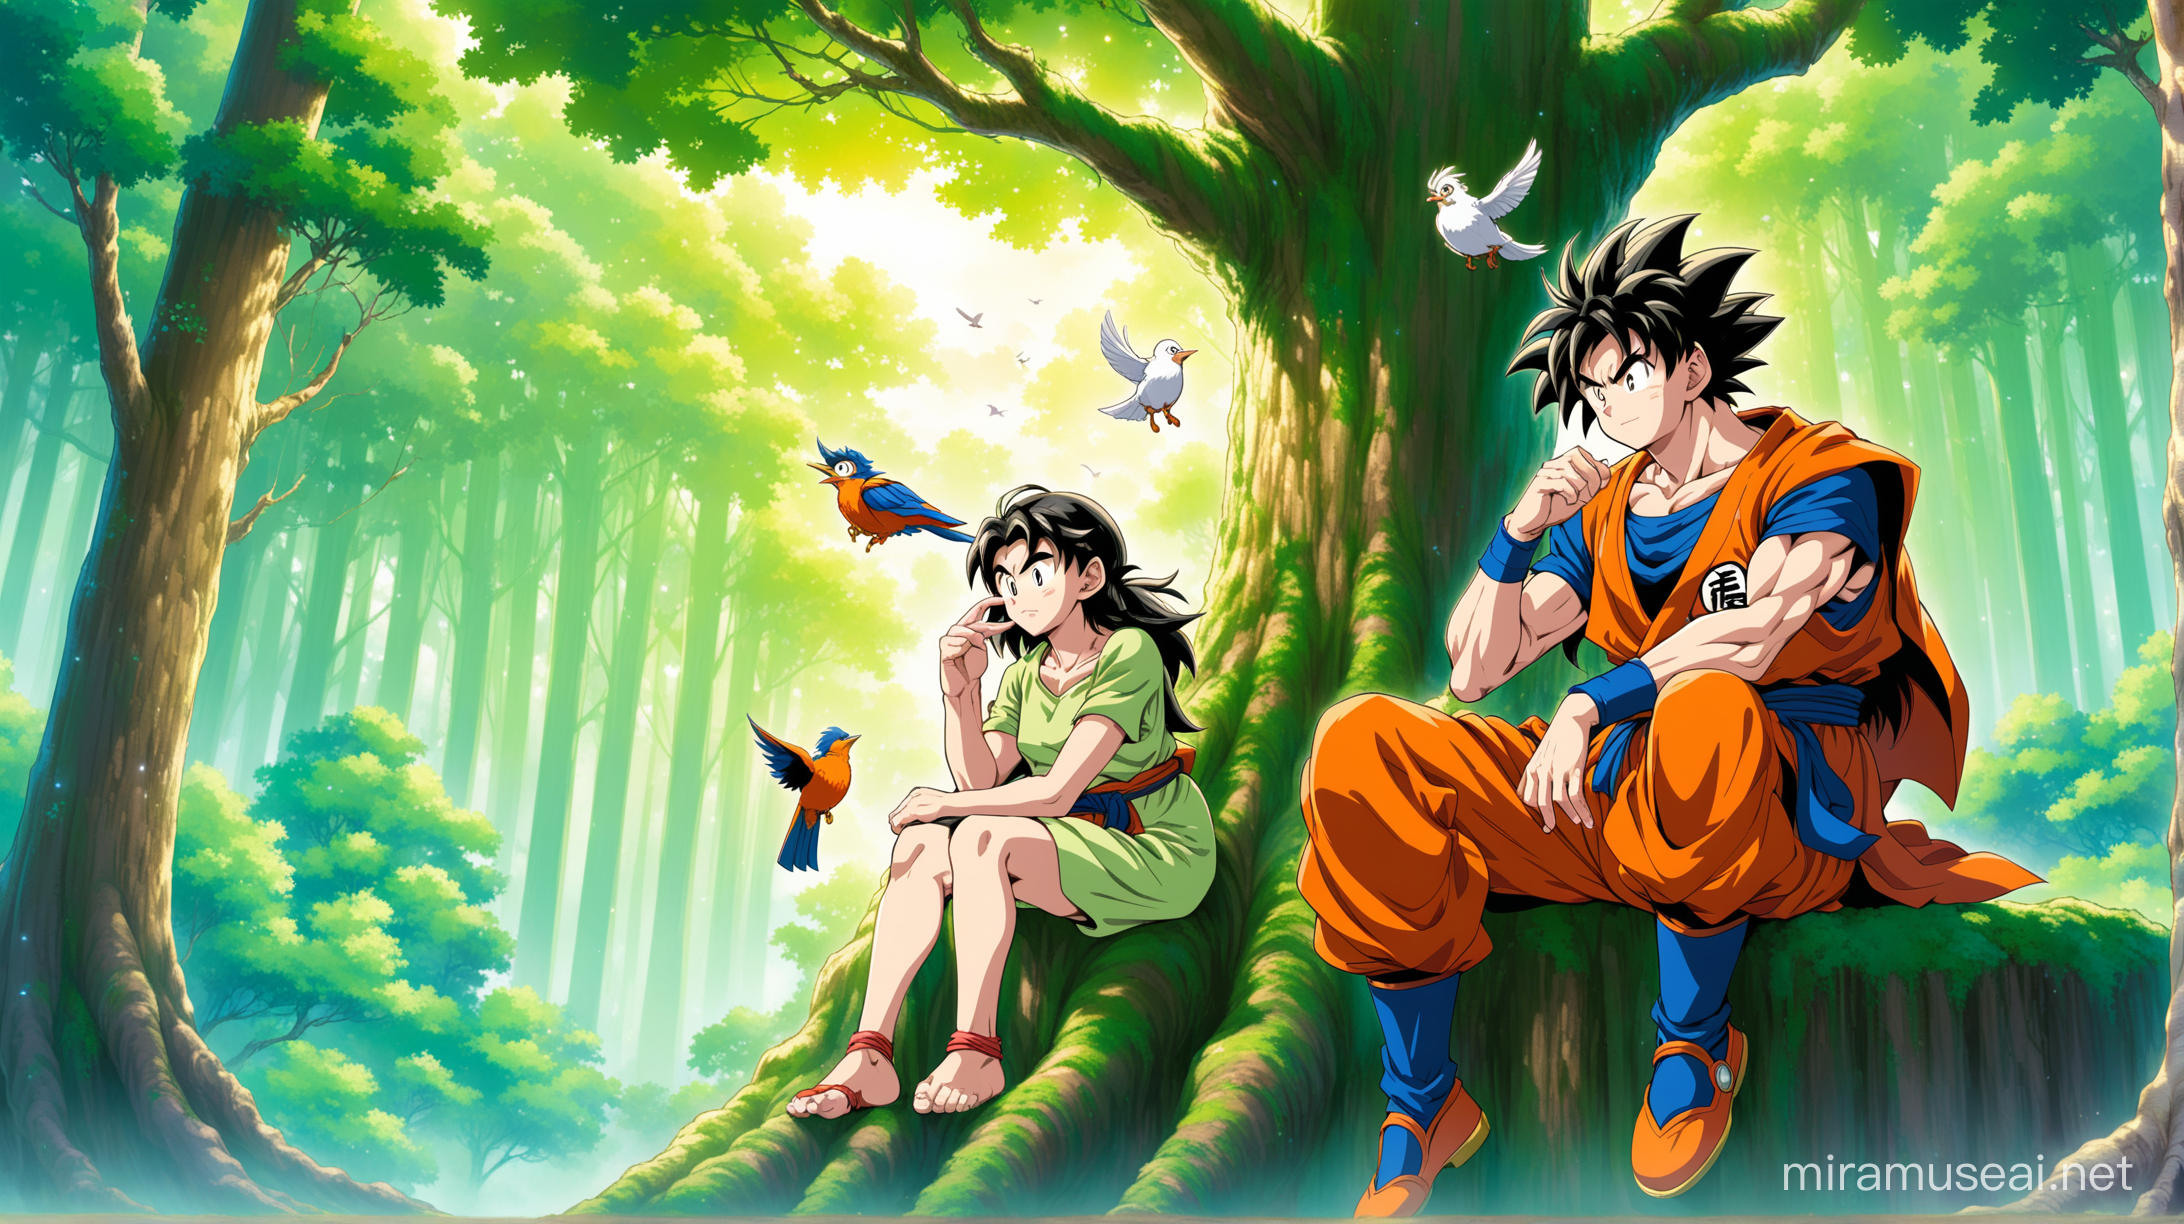 Tranquil Goku and ChiChi Resting in Enchanted Forest with Bird